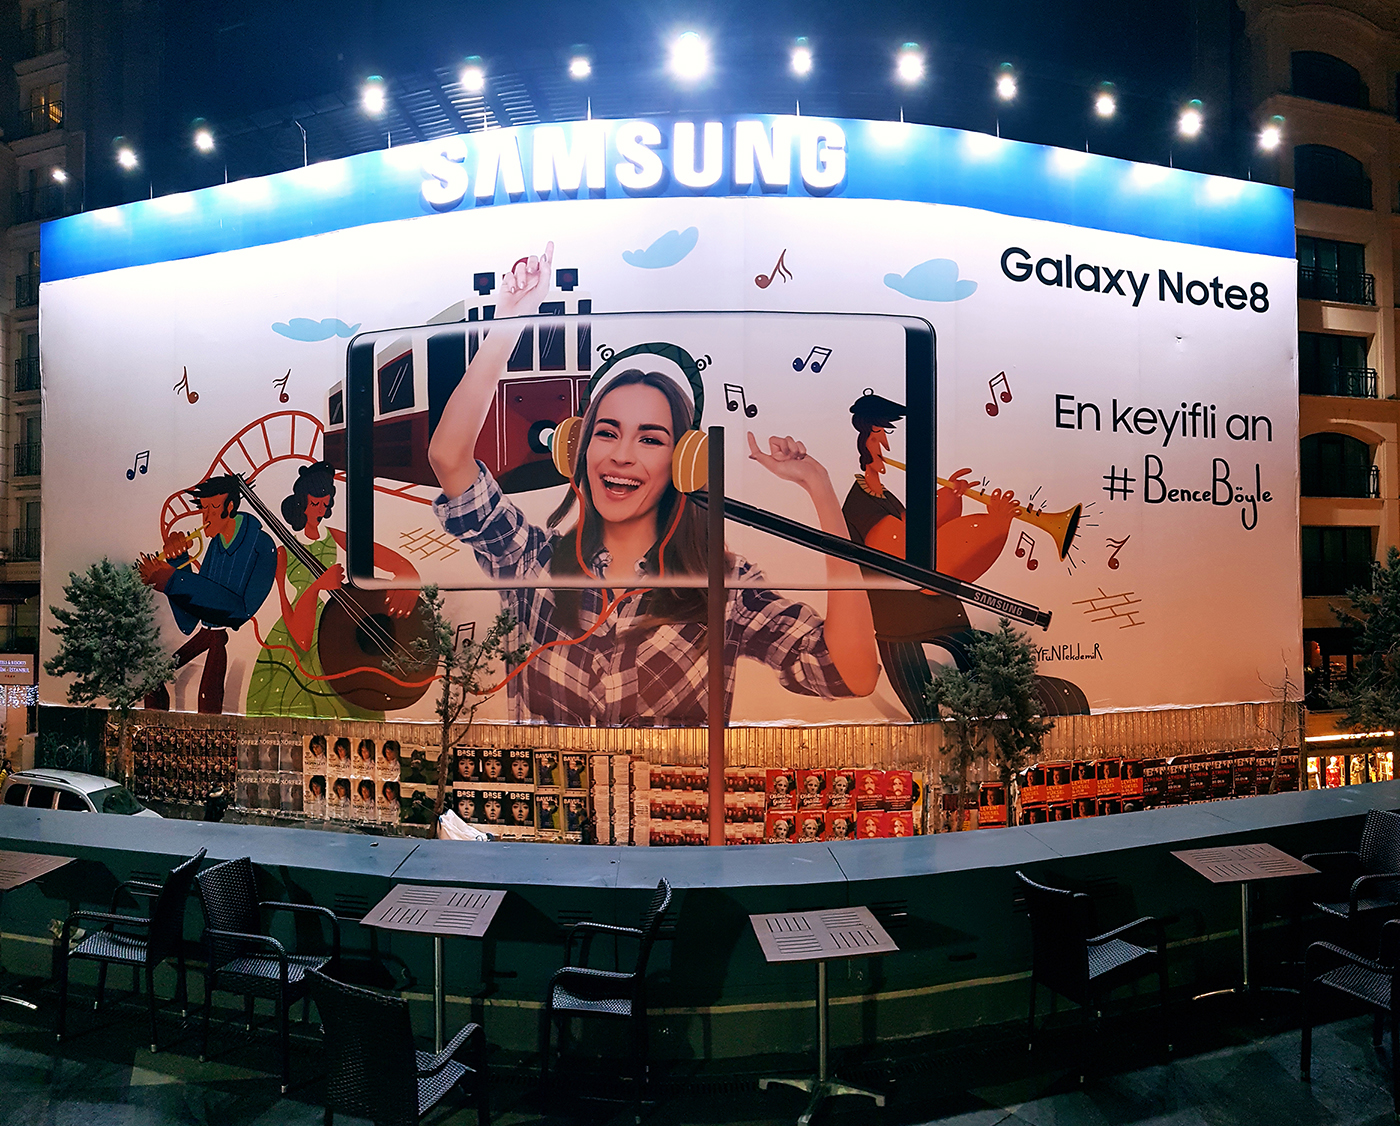 Samsung new ILLUSTRATION  featured Global istanbul Project campaign smart phone Note8